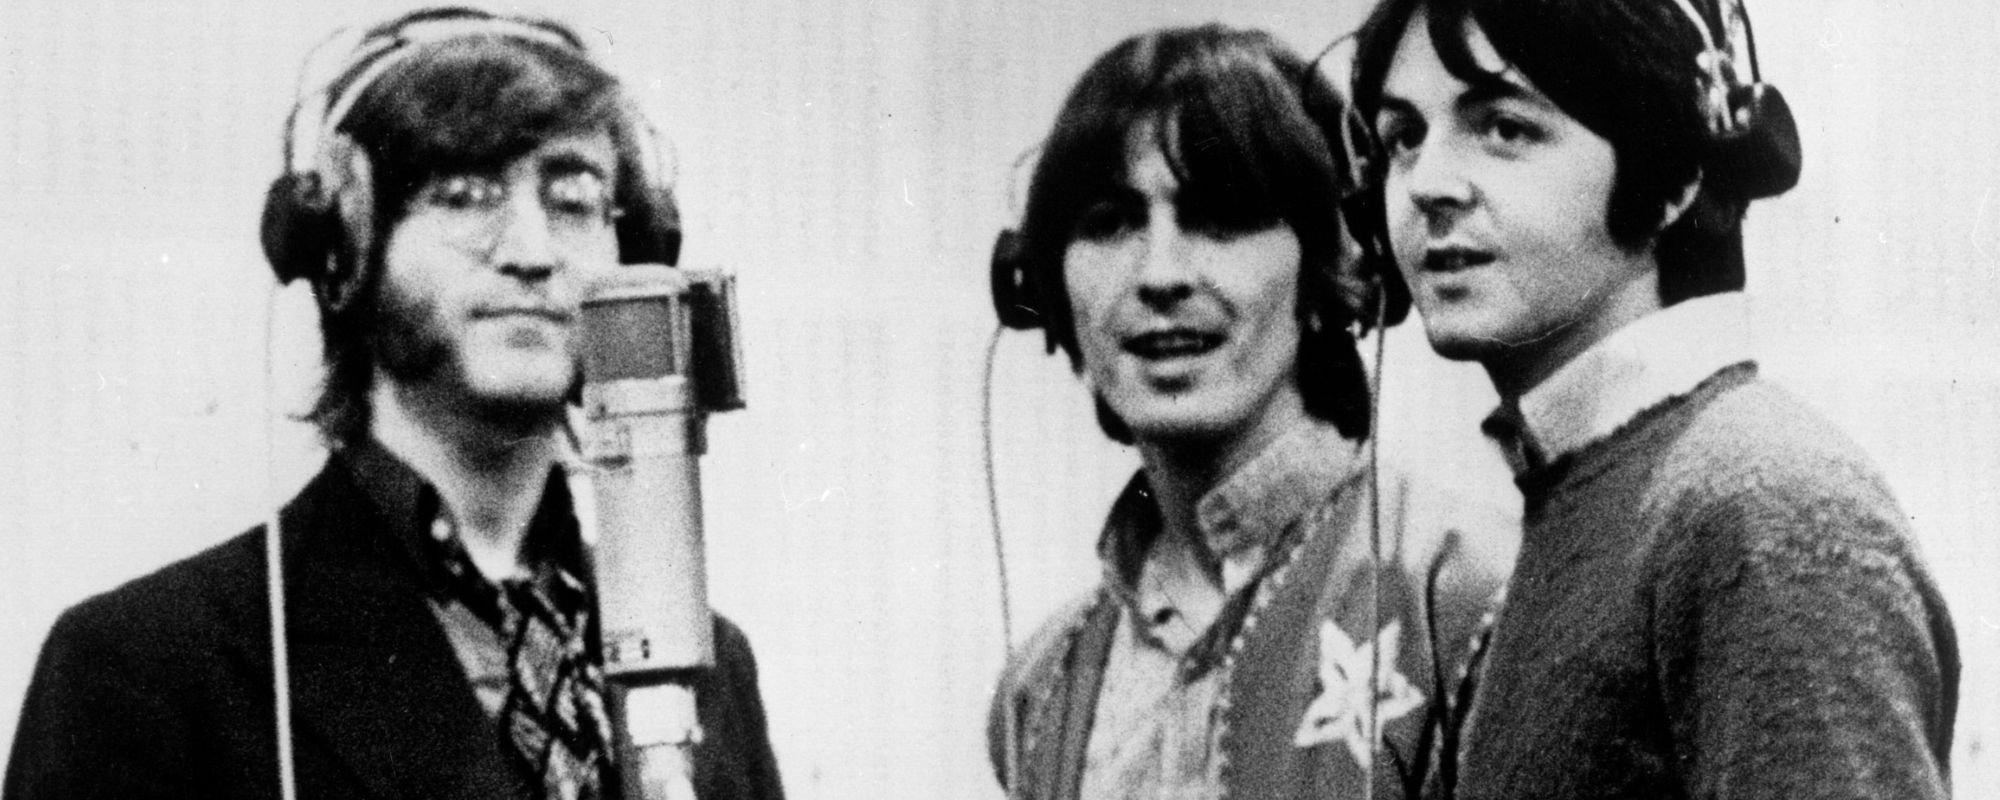 The Cheeky Stage Names The Beatles Adopted Before Becoming The Fab Four